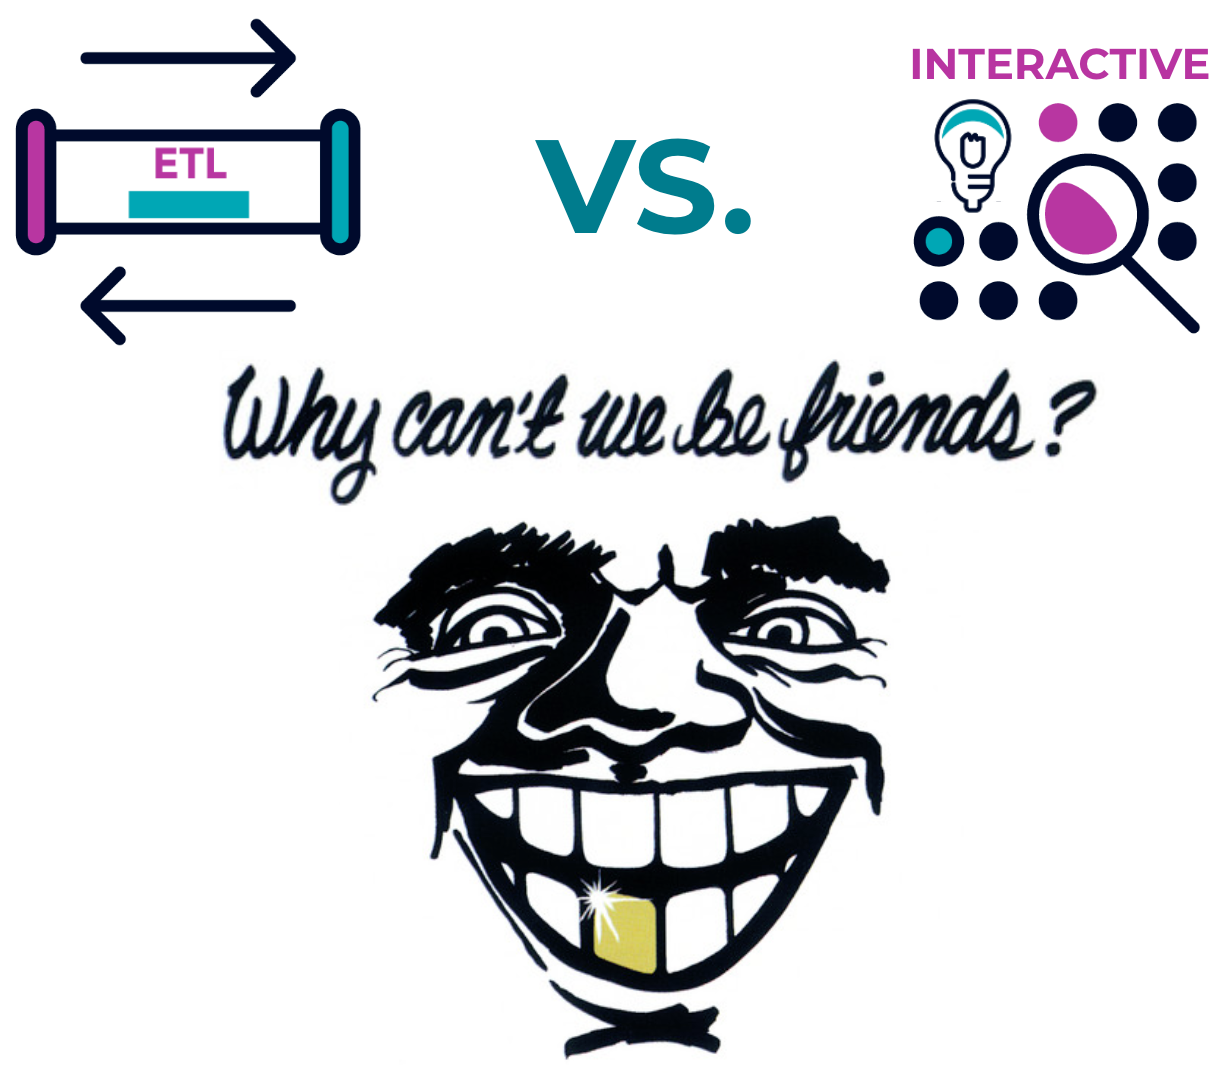 ETL vs Interactive Queries, why can't we be friends?